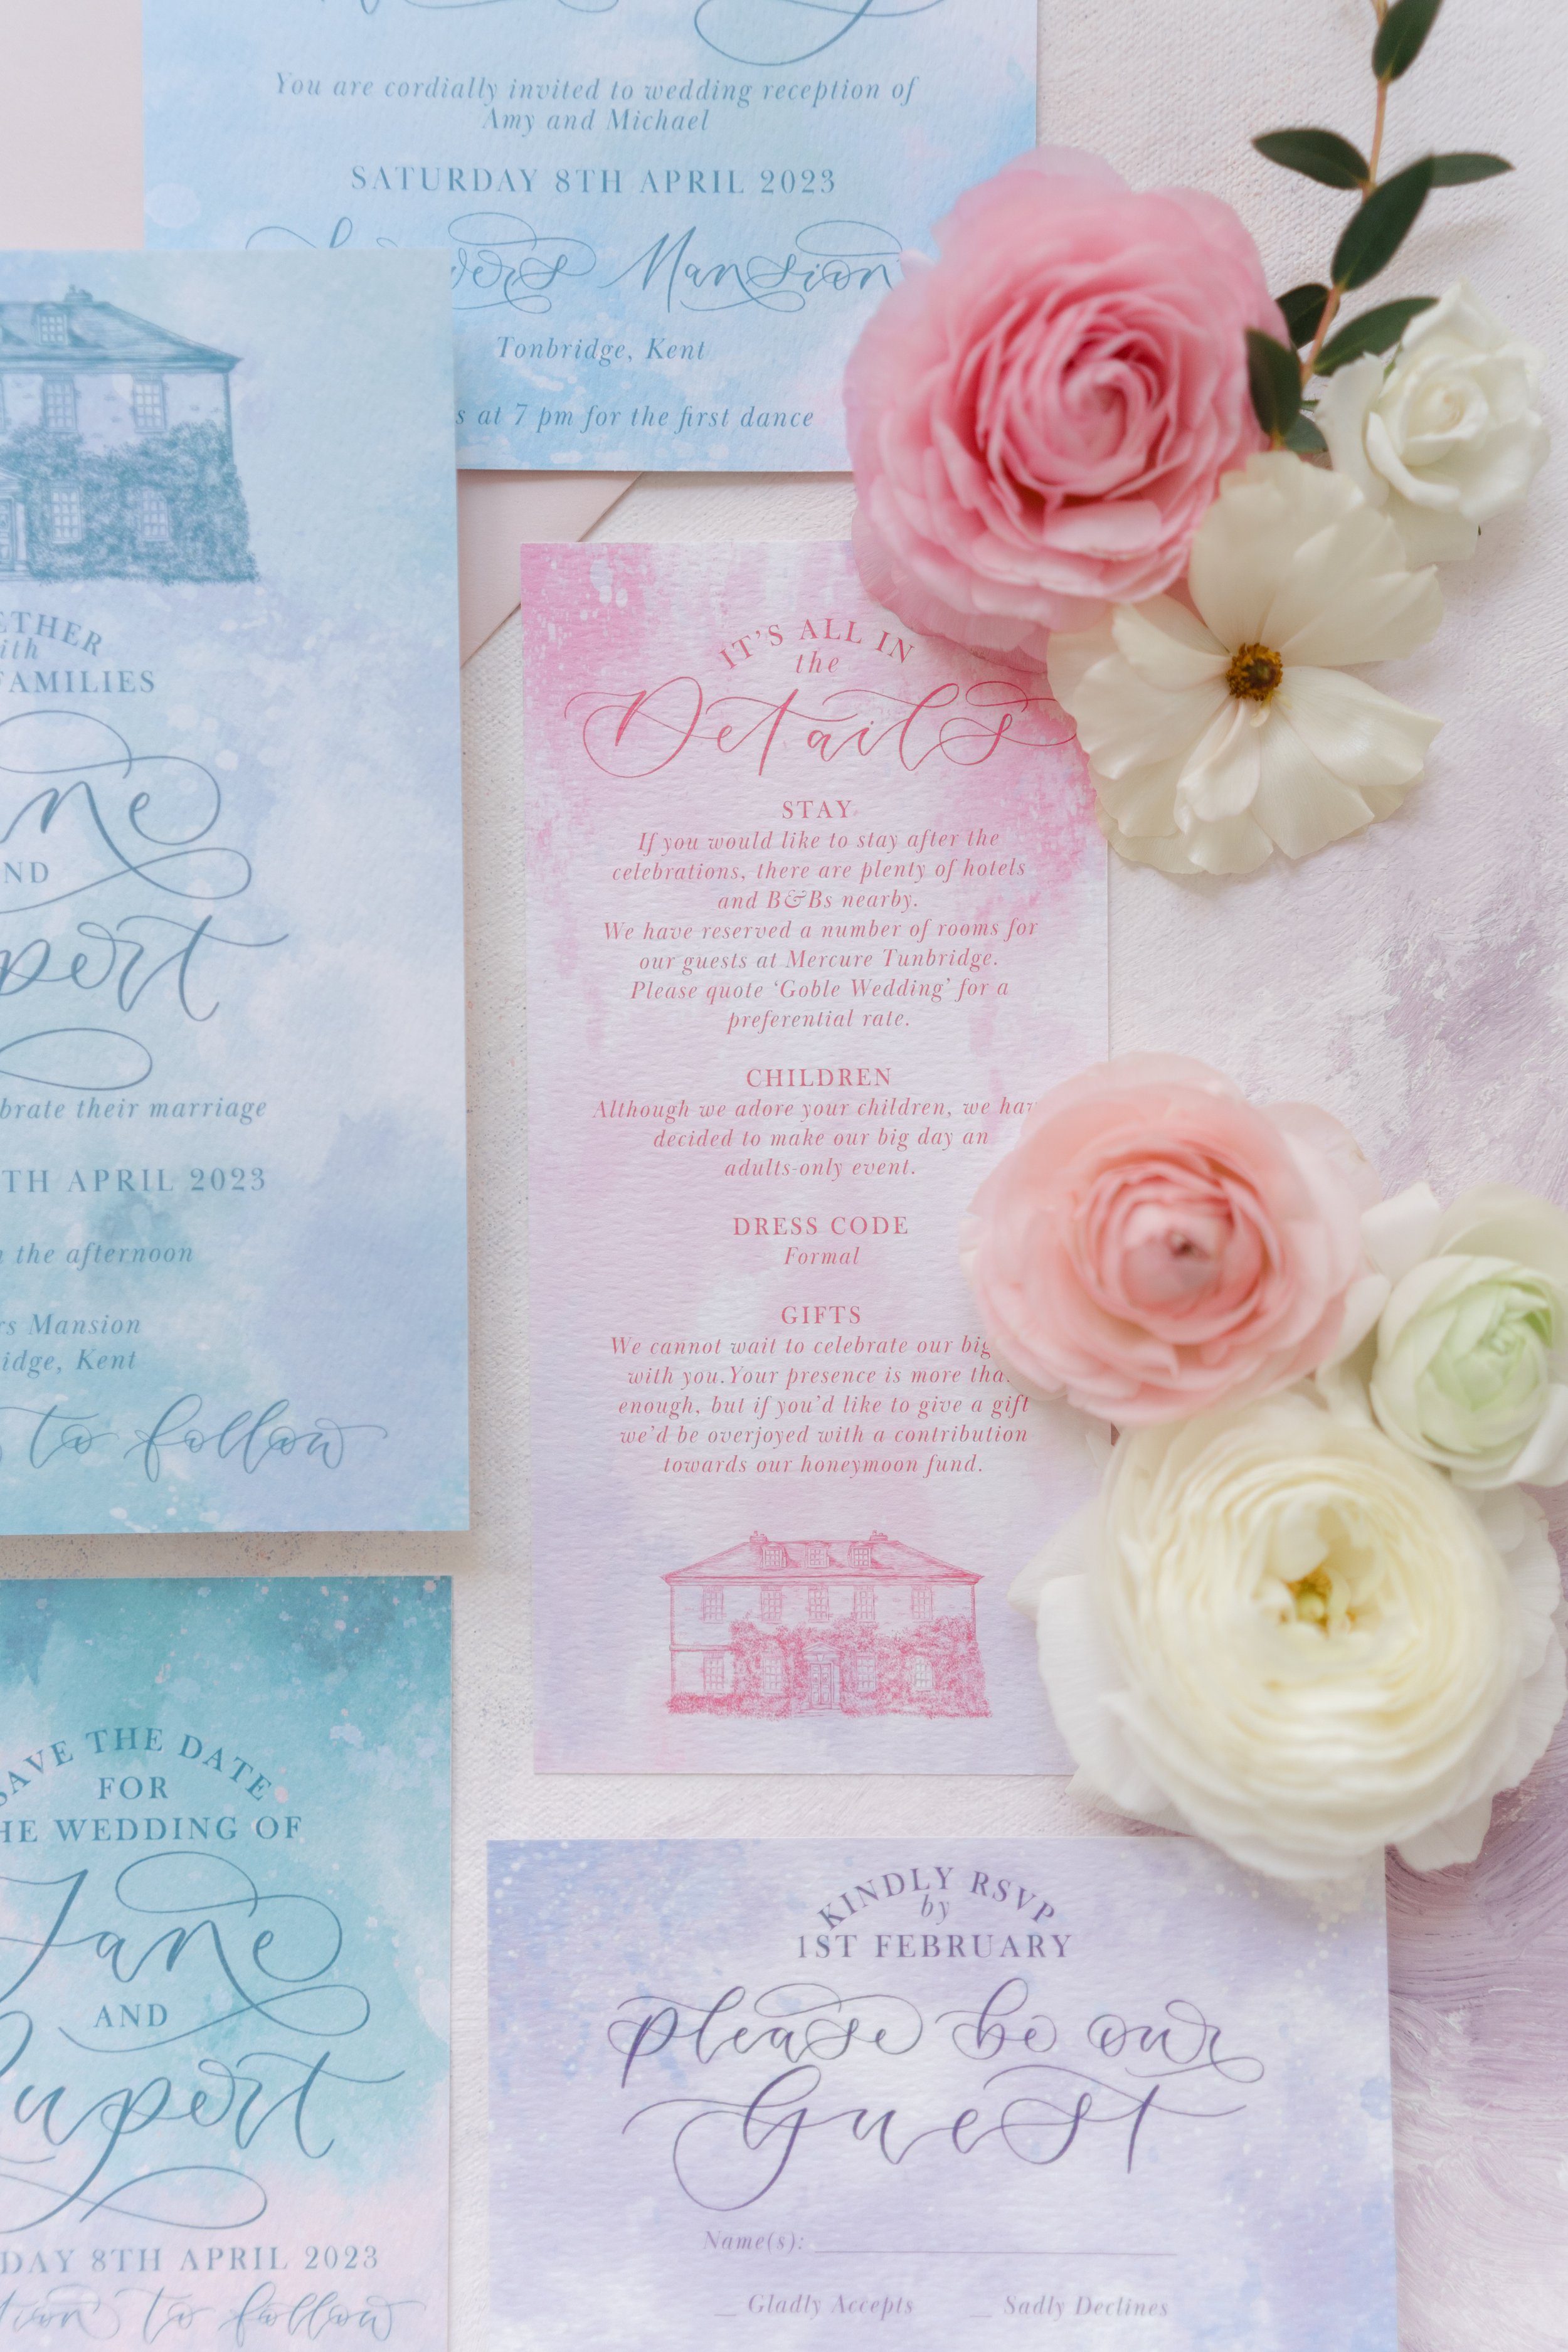 Details card - The Amyverse - pastel invitation set with invite, details card, rsvp card with pastel watercolour washes and venue illustration of sprivers mansion.jpg